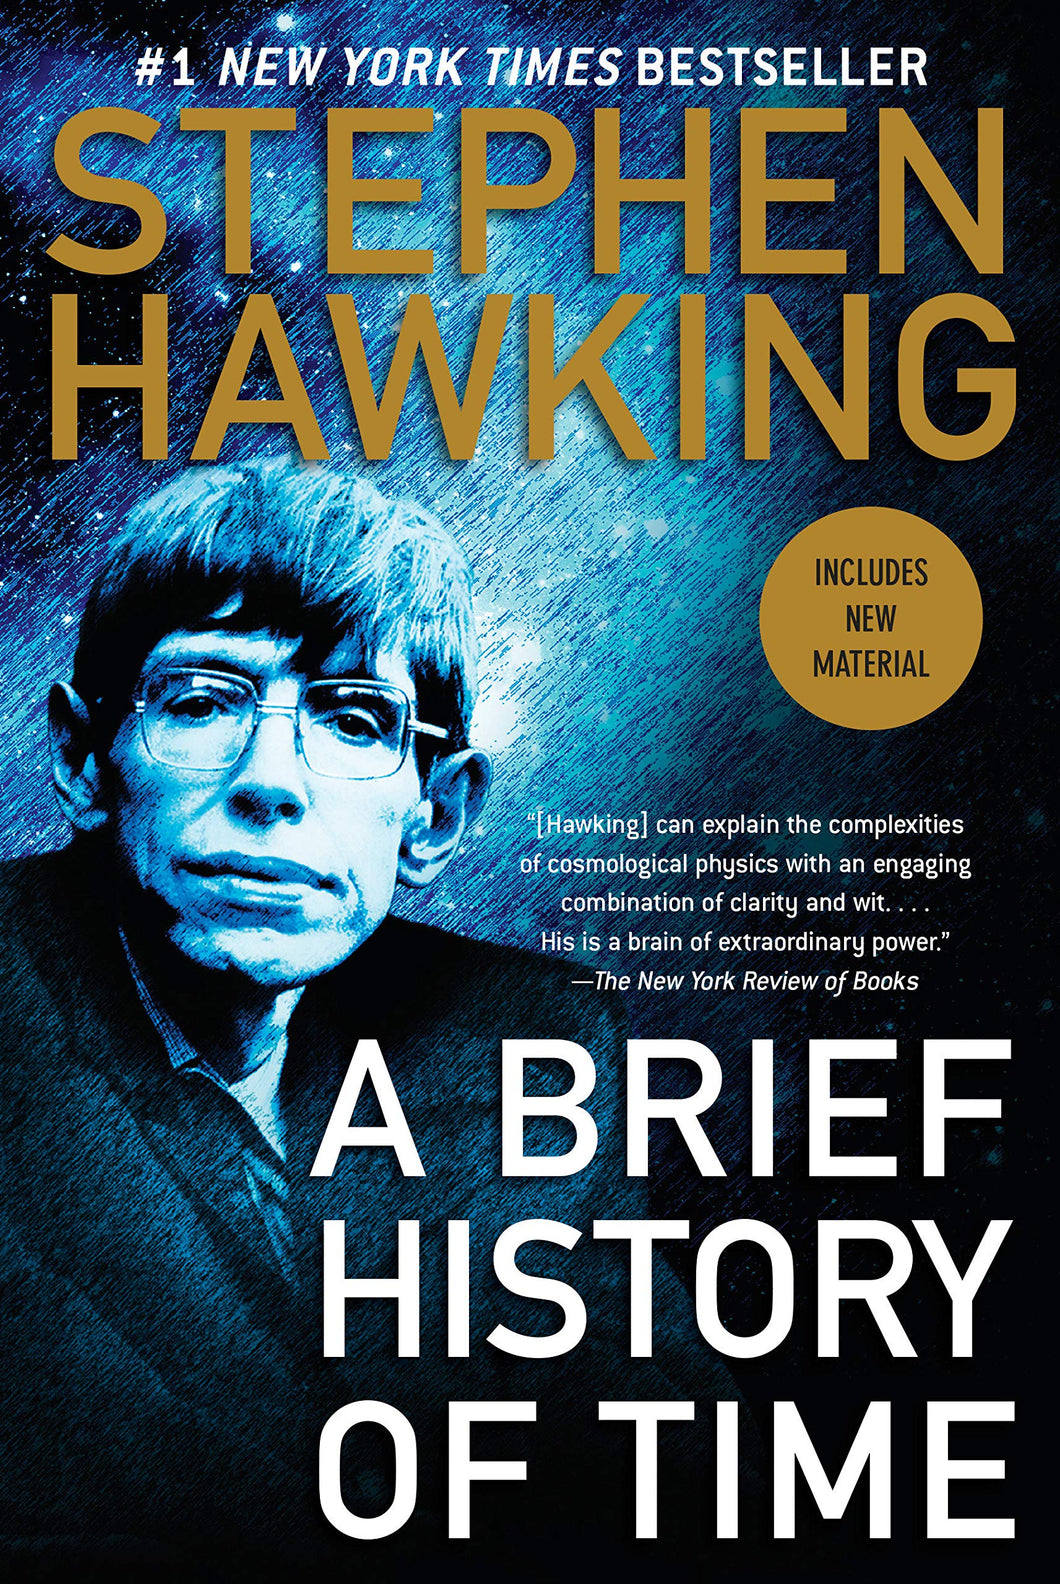 A BRIEF HISTORY OF TIME - Stephen Hawking